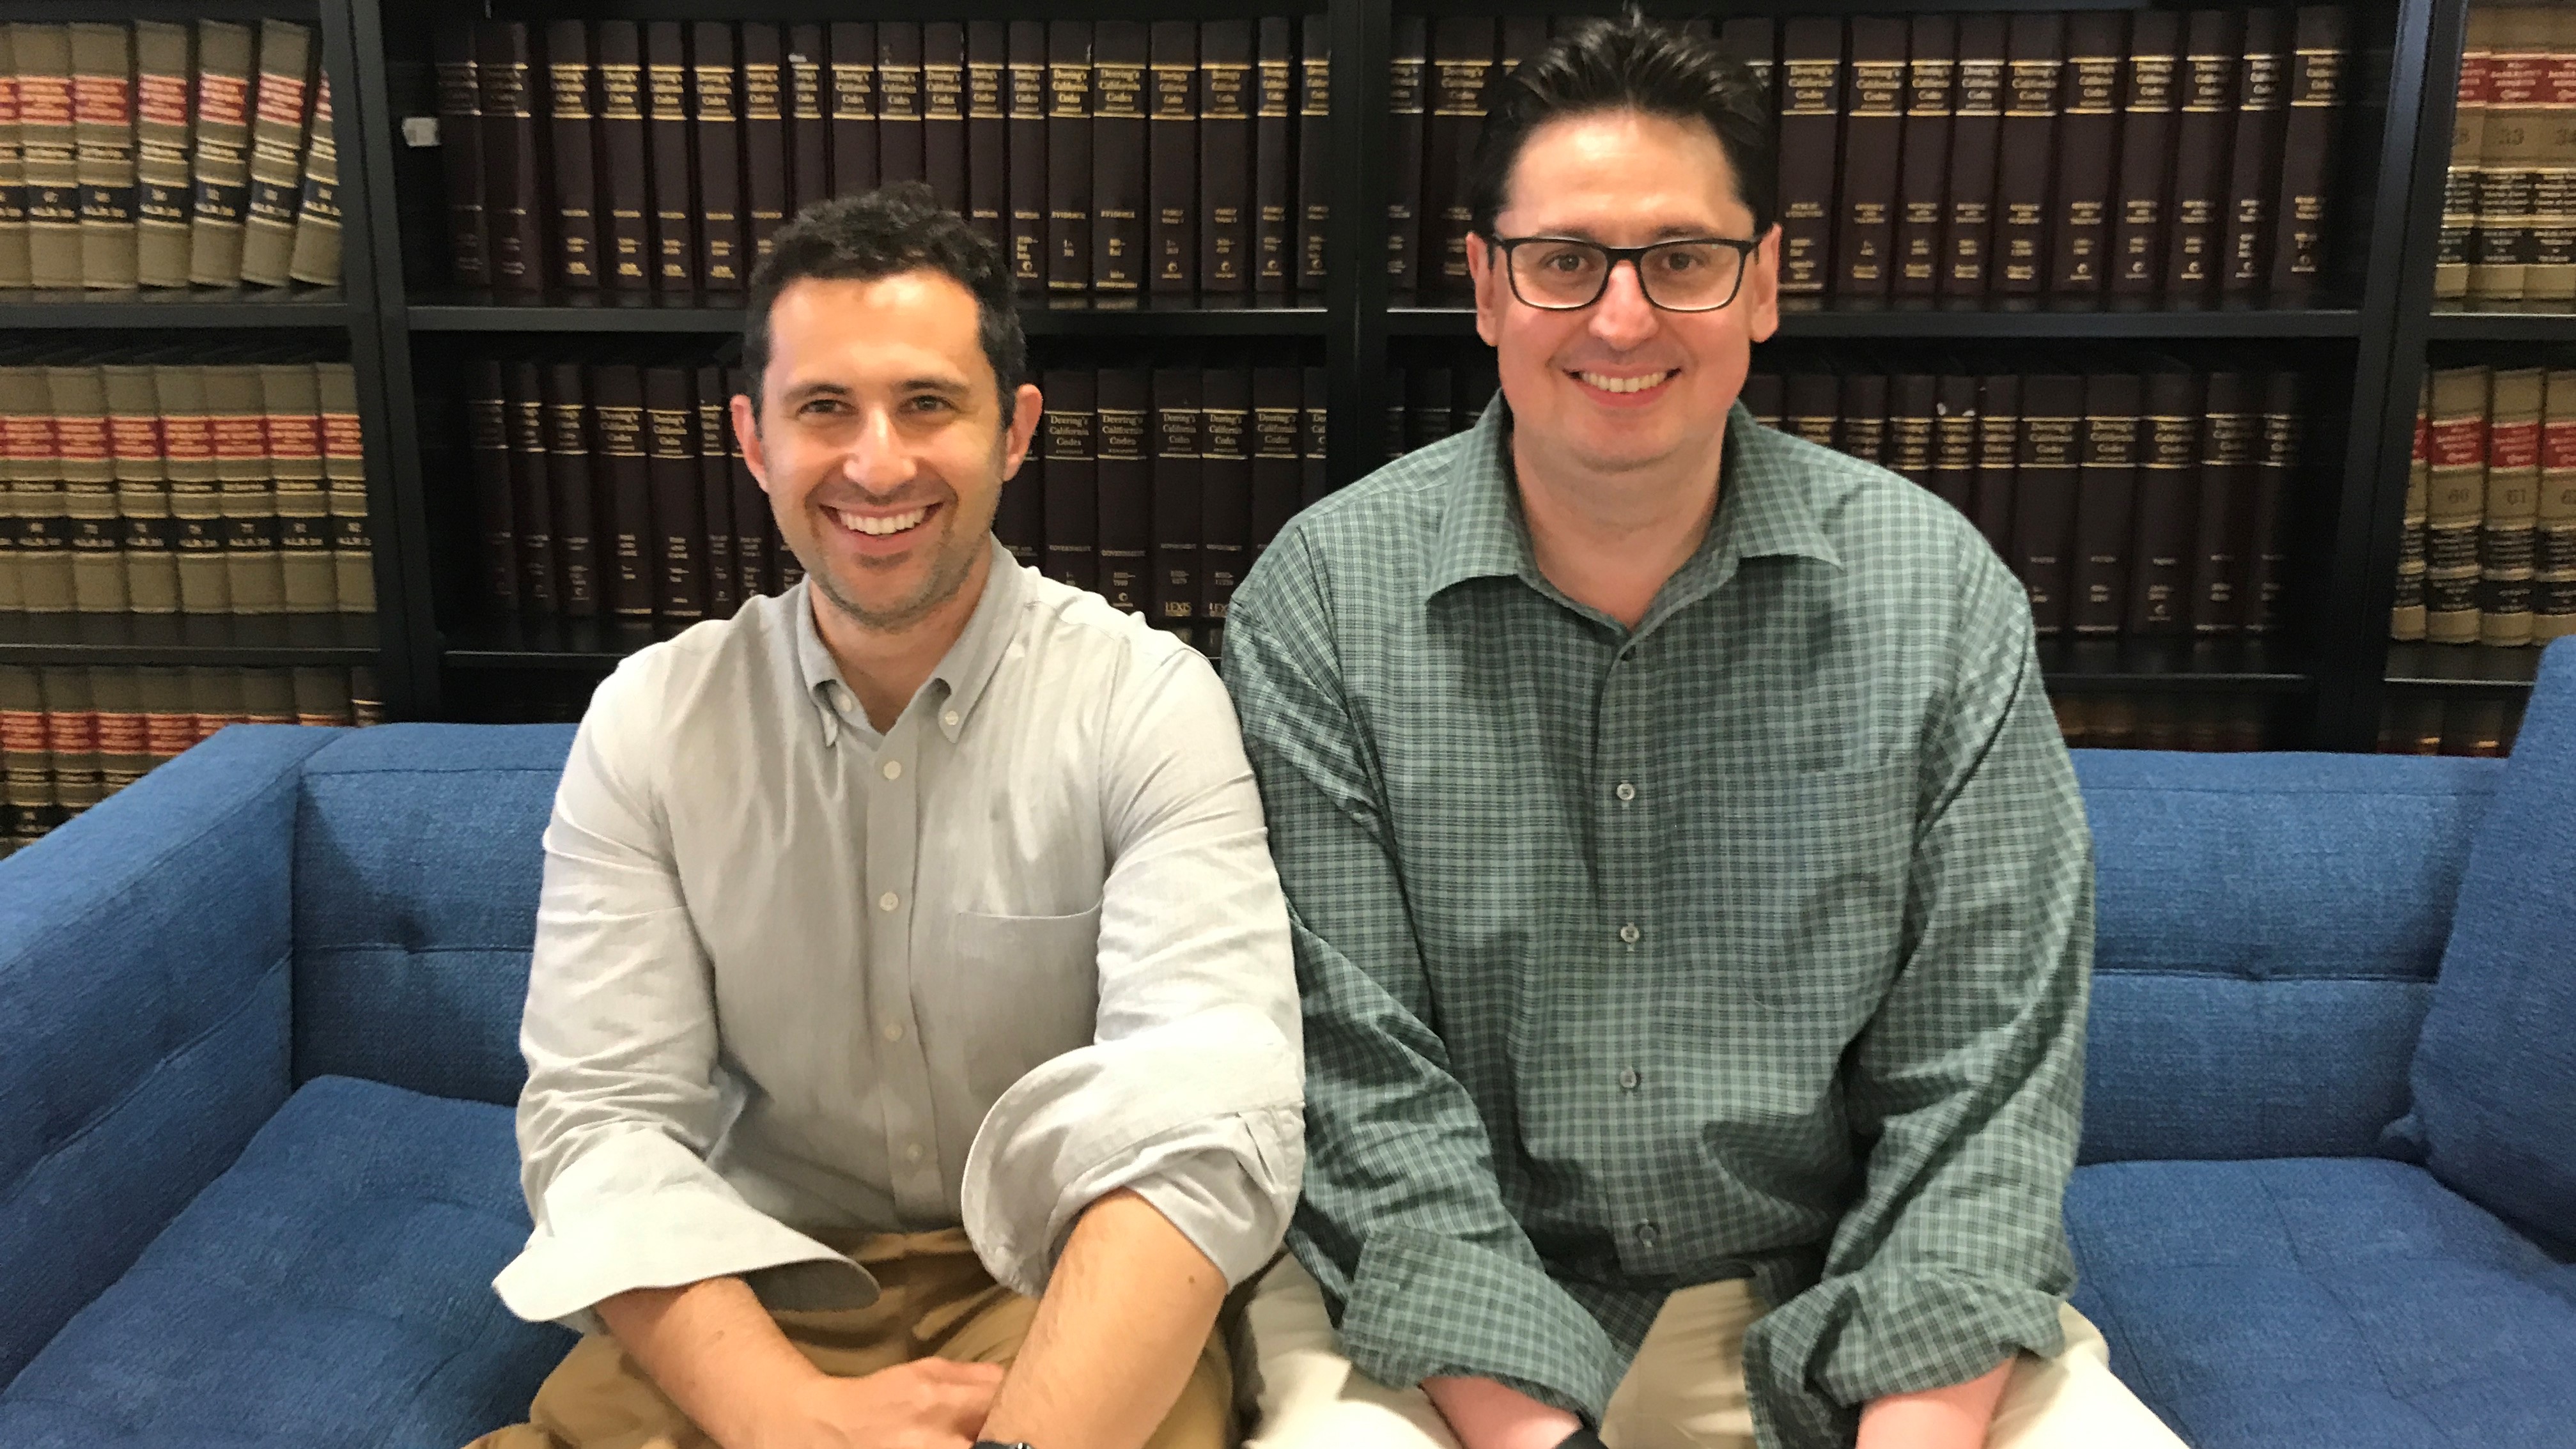 LawNext Episode 3: Casetext&#8217;s Founders on their Quest to Make Legal Research Affordable